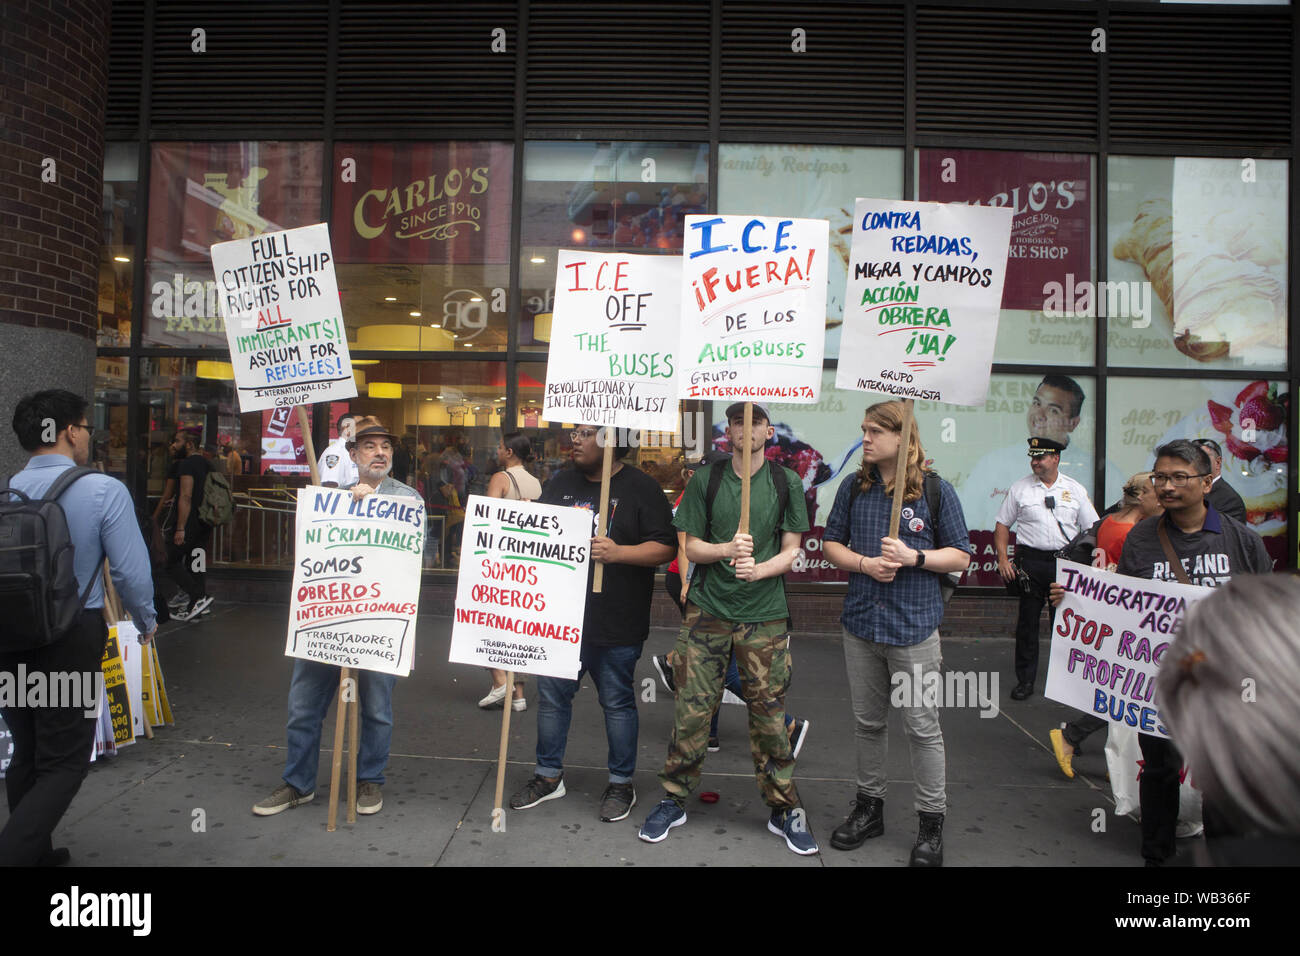 August 23, 2019: Demonstrators are shown protesting against Greyhound Corporation and ICE (Immigration Customs and Enforcement) at the Port Authority Bus Terminal on 42nd and 8th Avenue in New York, New York. About 100 activists from a coalition of groups including FIRE (Fight For Immigrant Refugees Everywhere) protested Greyhound allowing ICE agents to board their busses 'searching for migrants,'' officials said Credit: Brian Branch Price/ZUMA Wire/Alamy Live News Stock Photo